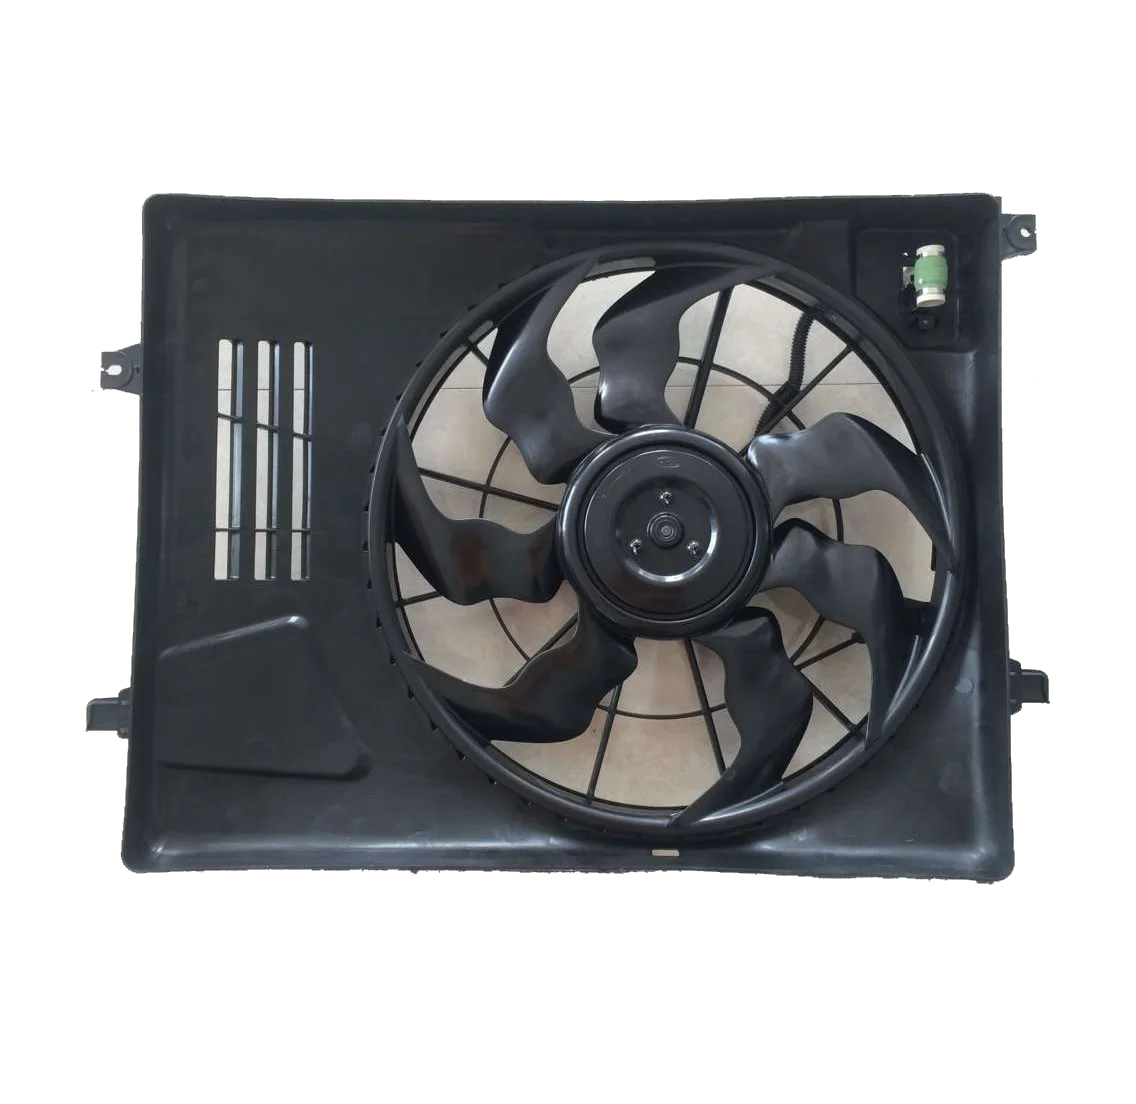 Oe 25380 F8500 12 Volt Fan Auto Air Conditioner Car Air Cooler Fan For Kia Sportage 2018 Buy Ac Parts Cooling Fan Auto Cooling Fan Auto Car Cooling Fan Product On Alibaba Com